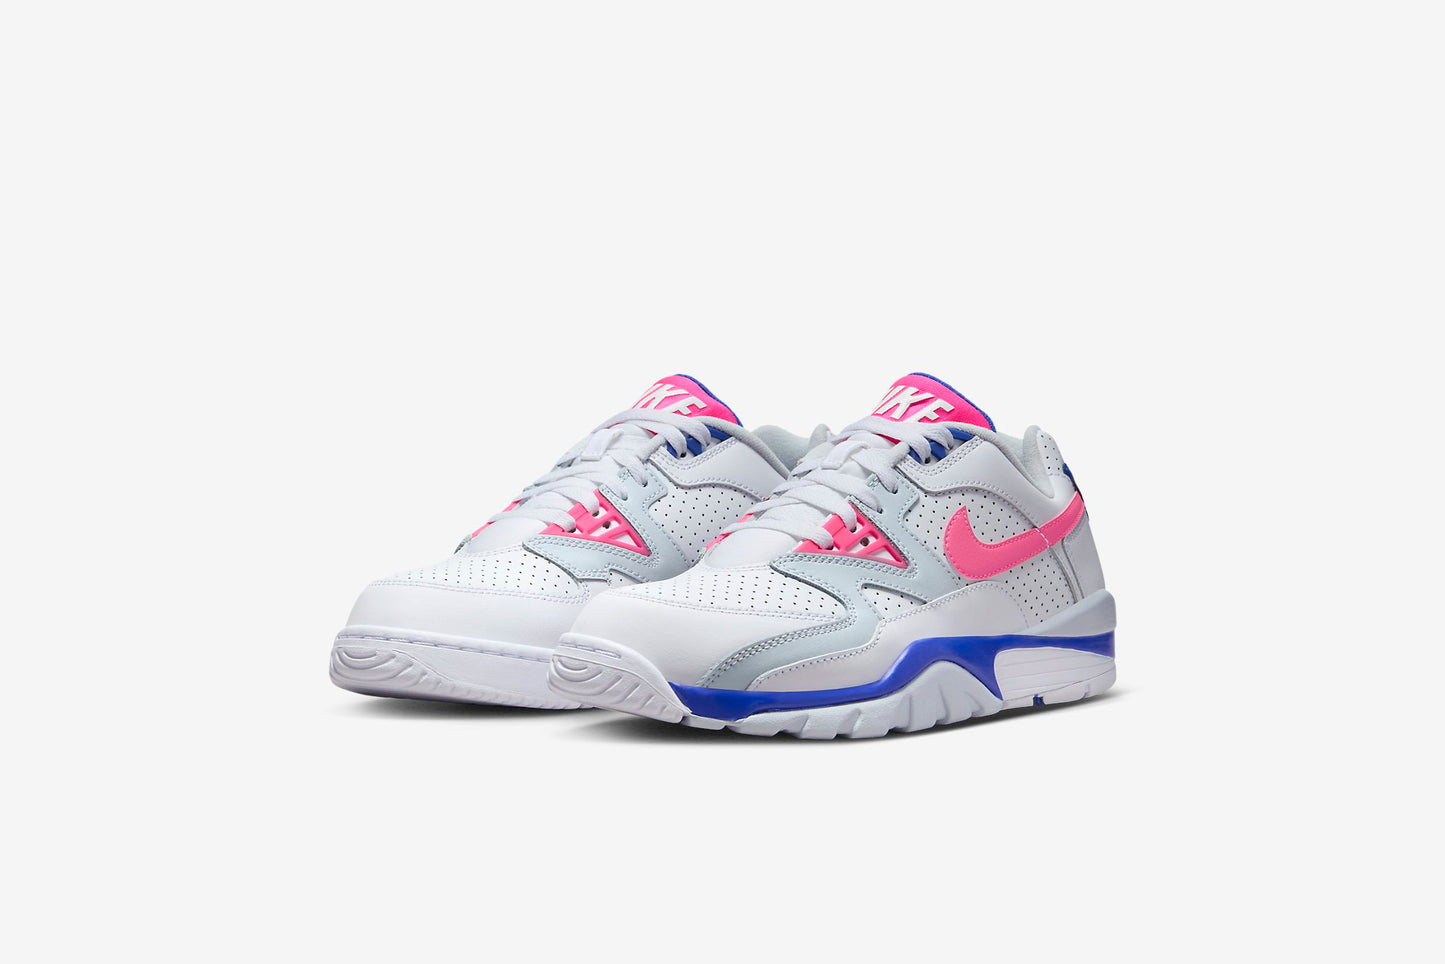 Nike "Air Cross Trainer 3 Low" M - White / Hyper Pink-Racer Blue